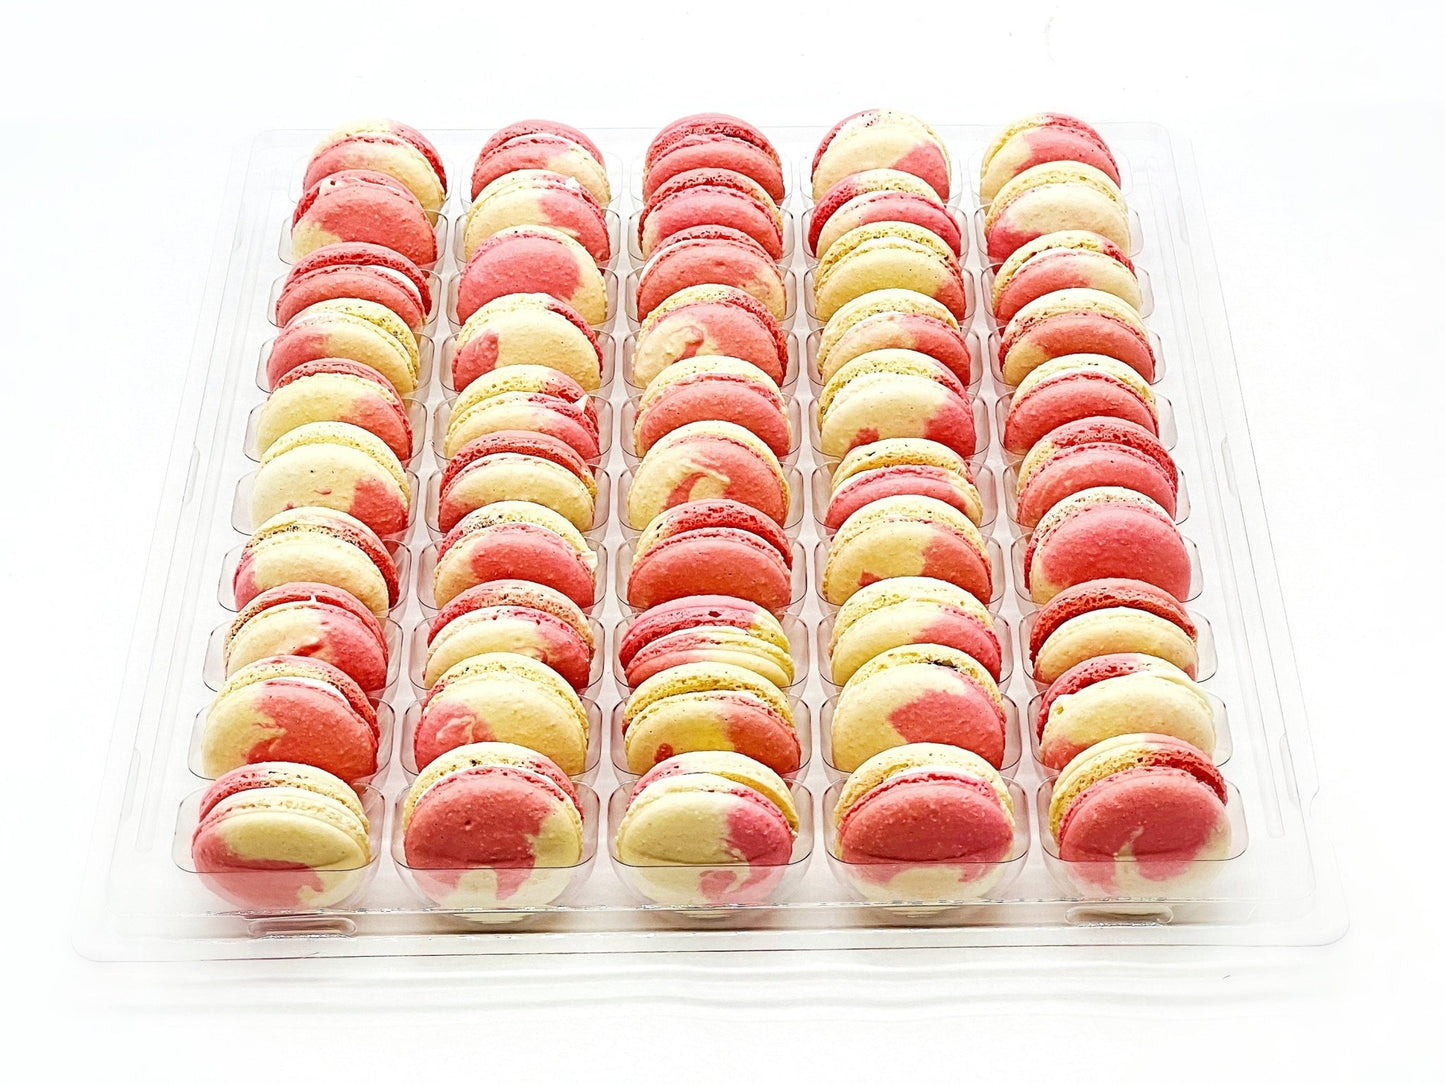 50 Pack White Chocolate Berries French Macaron Value Pack - Macaron Centrale